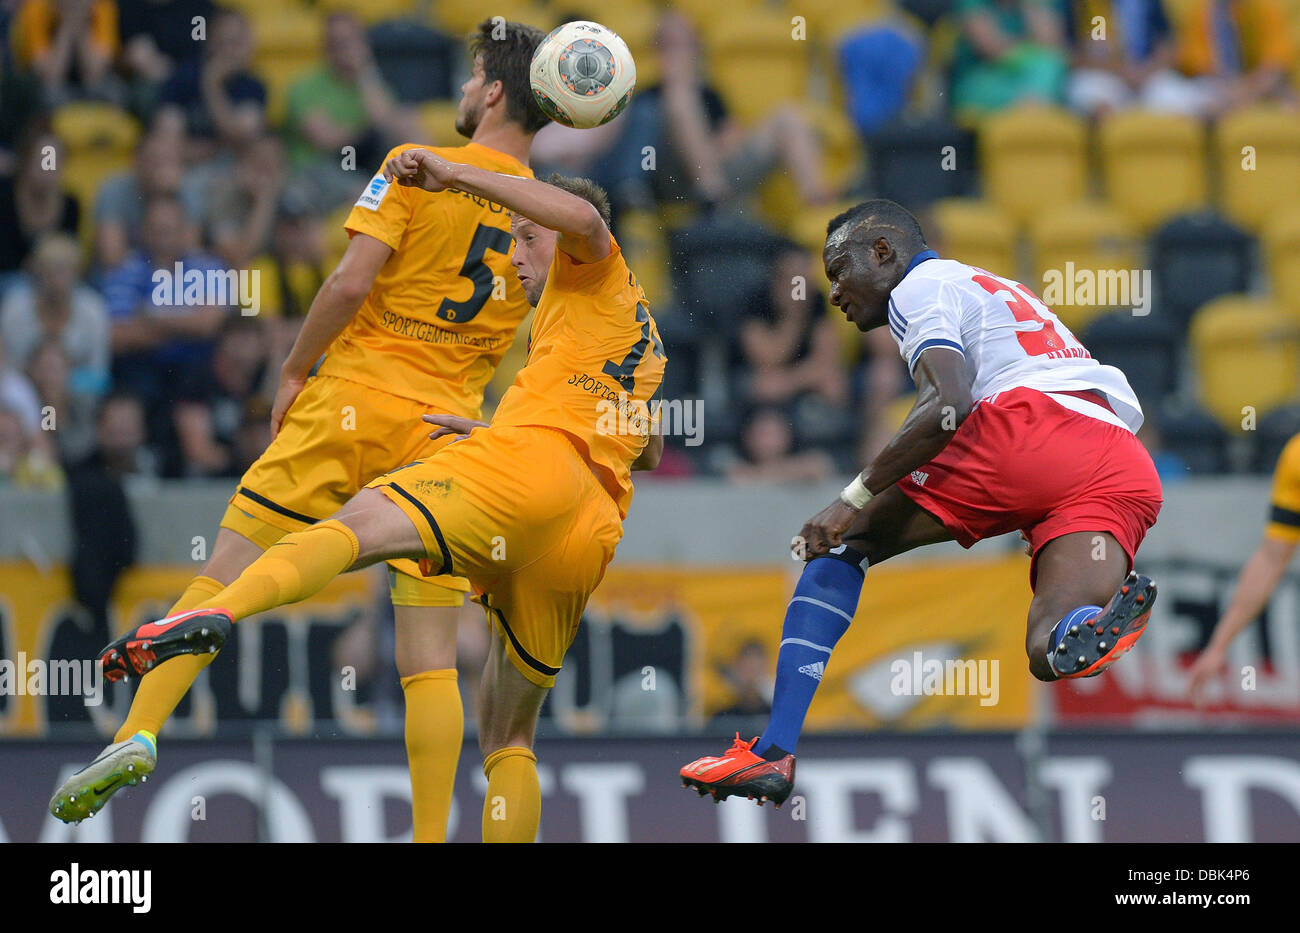 Dresden, Germany. 31st July, 2013. Dresden's Romain Bregerie (L) nd Adnan Mravac (C) vie for the ball with Hamburg's Jacques Zoua during a benefit match between SG Dynamo Dresden and Hamburger SV at gluecksgas stadium in Dresden, Germany, 31 July 2013. The earnings of the match go to victims of the recent floodings in Germany, according to the organisers. Photo: Thomas Eisenhuth/dpa/Alamy Live News Stock Photo